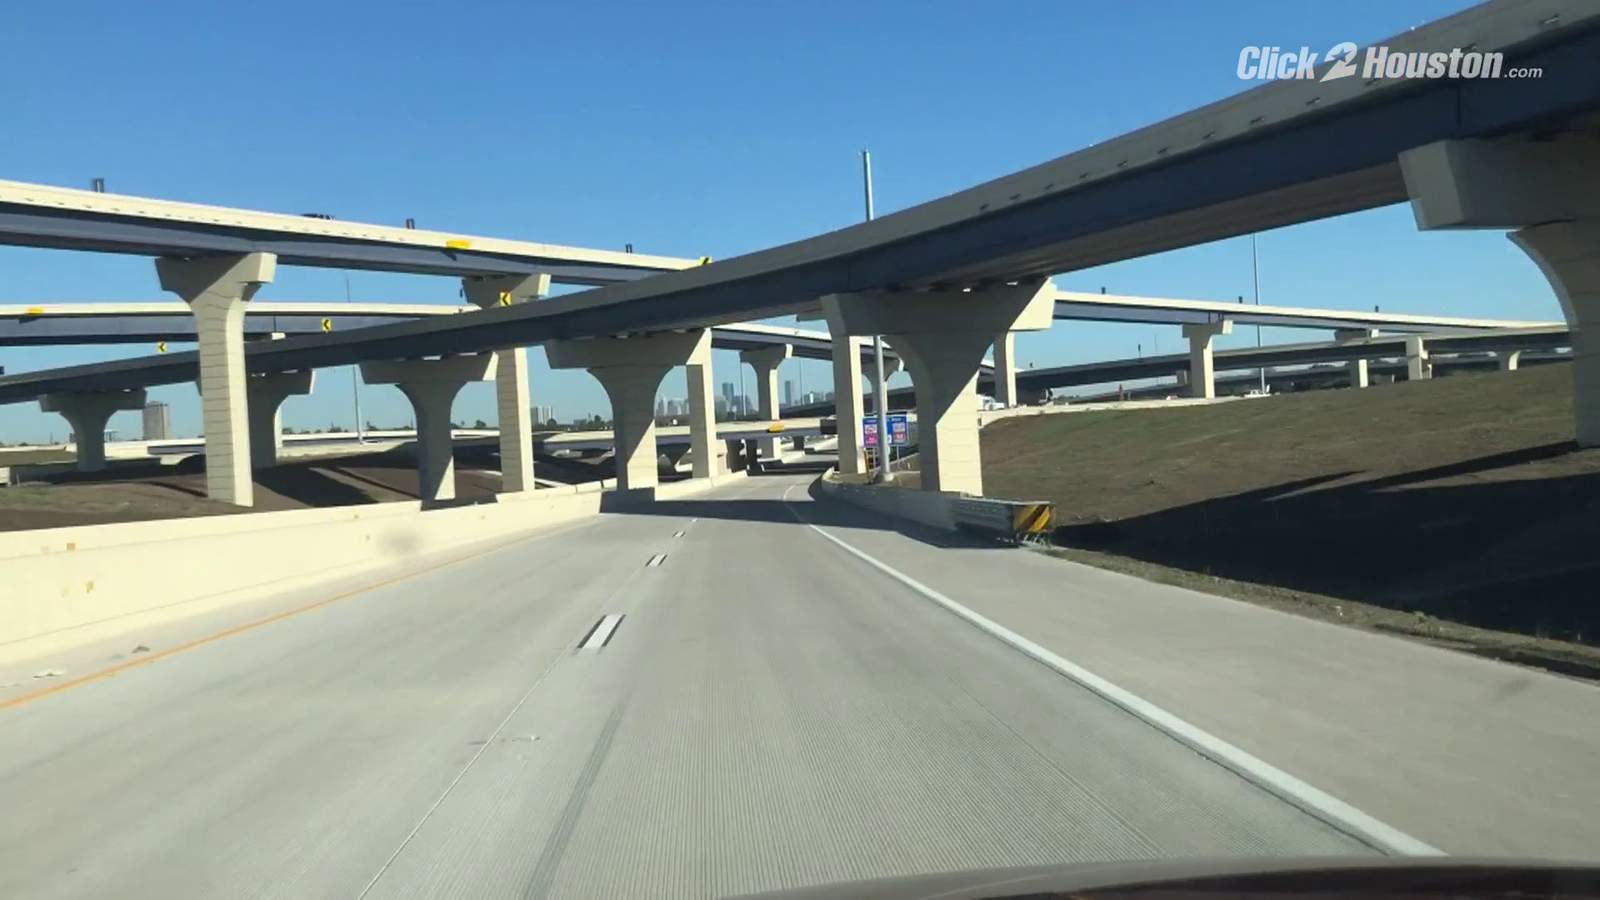 Fresh drive: This is what the new 288 toll road looks like for one of the first drivers